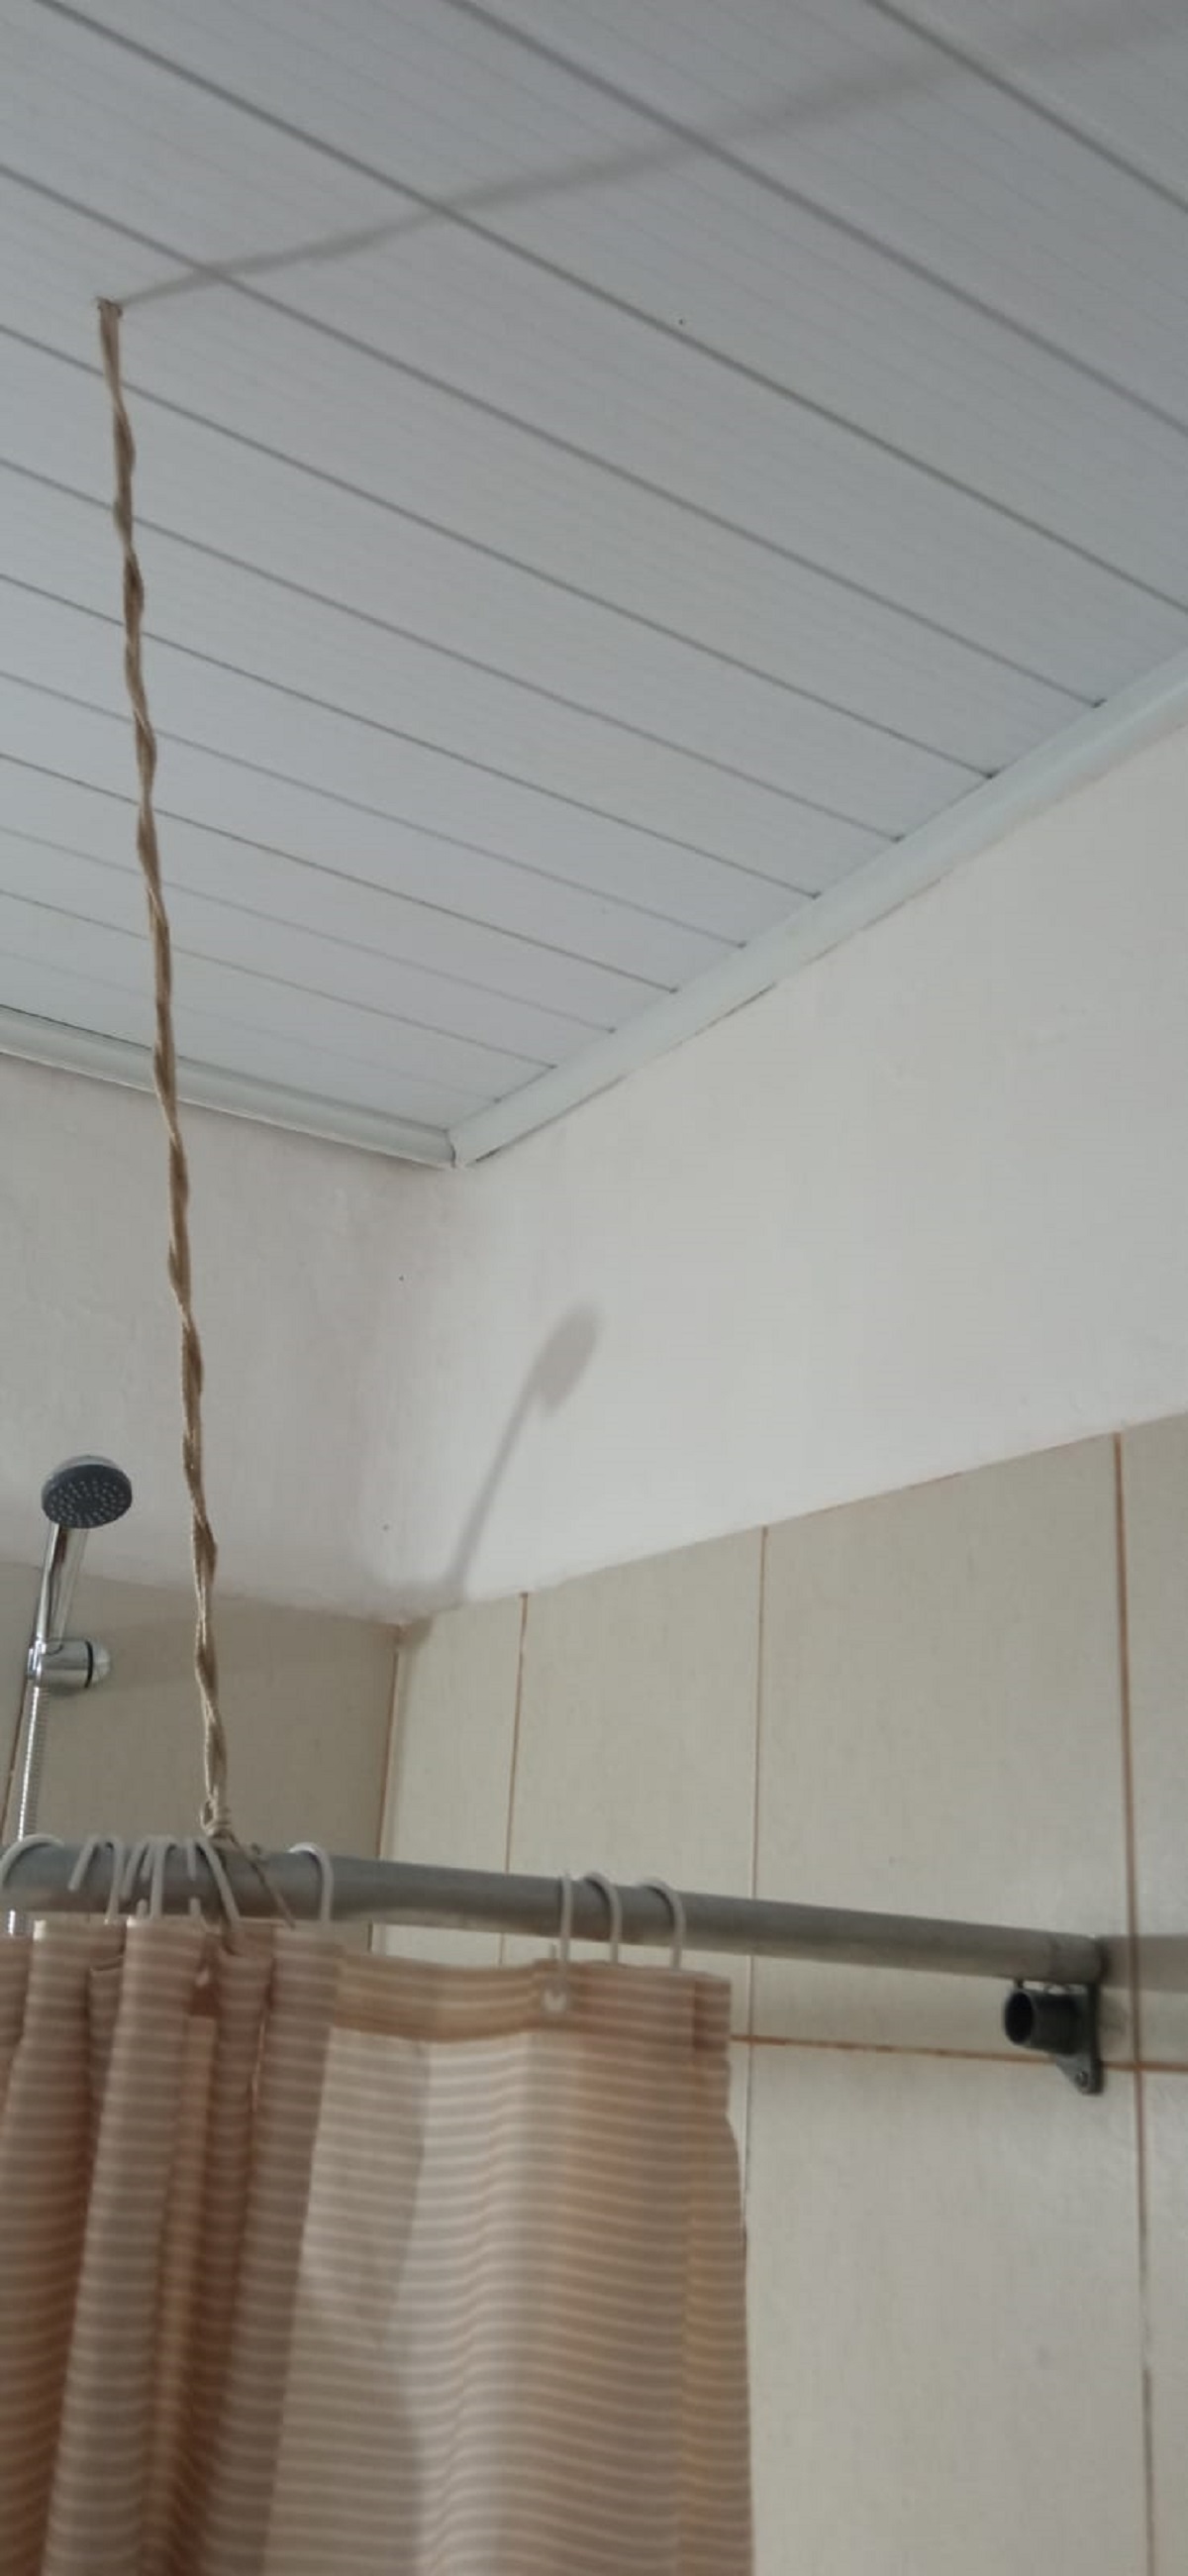 “Fixed the shower curtain boss.”